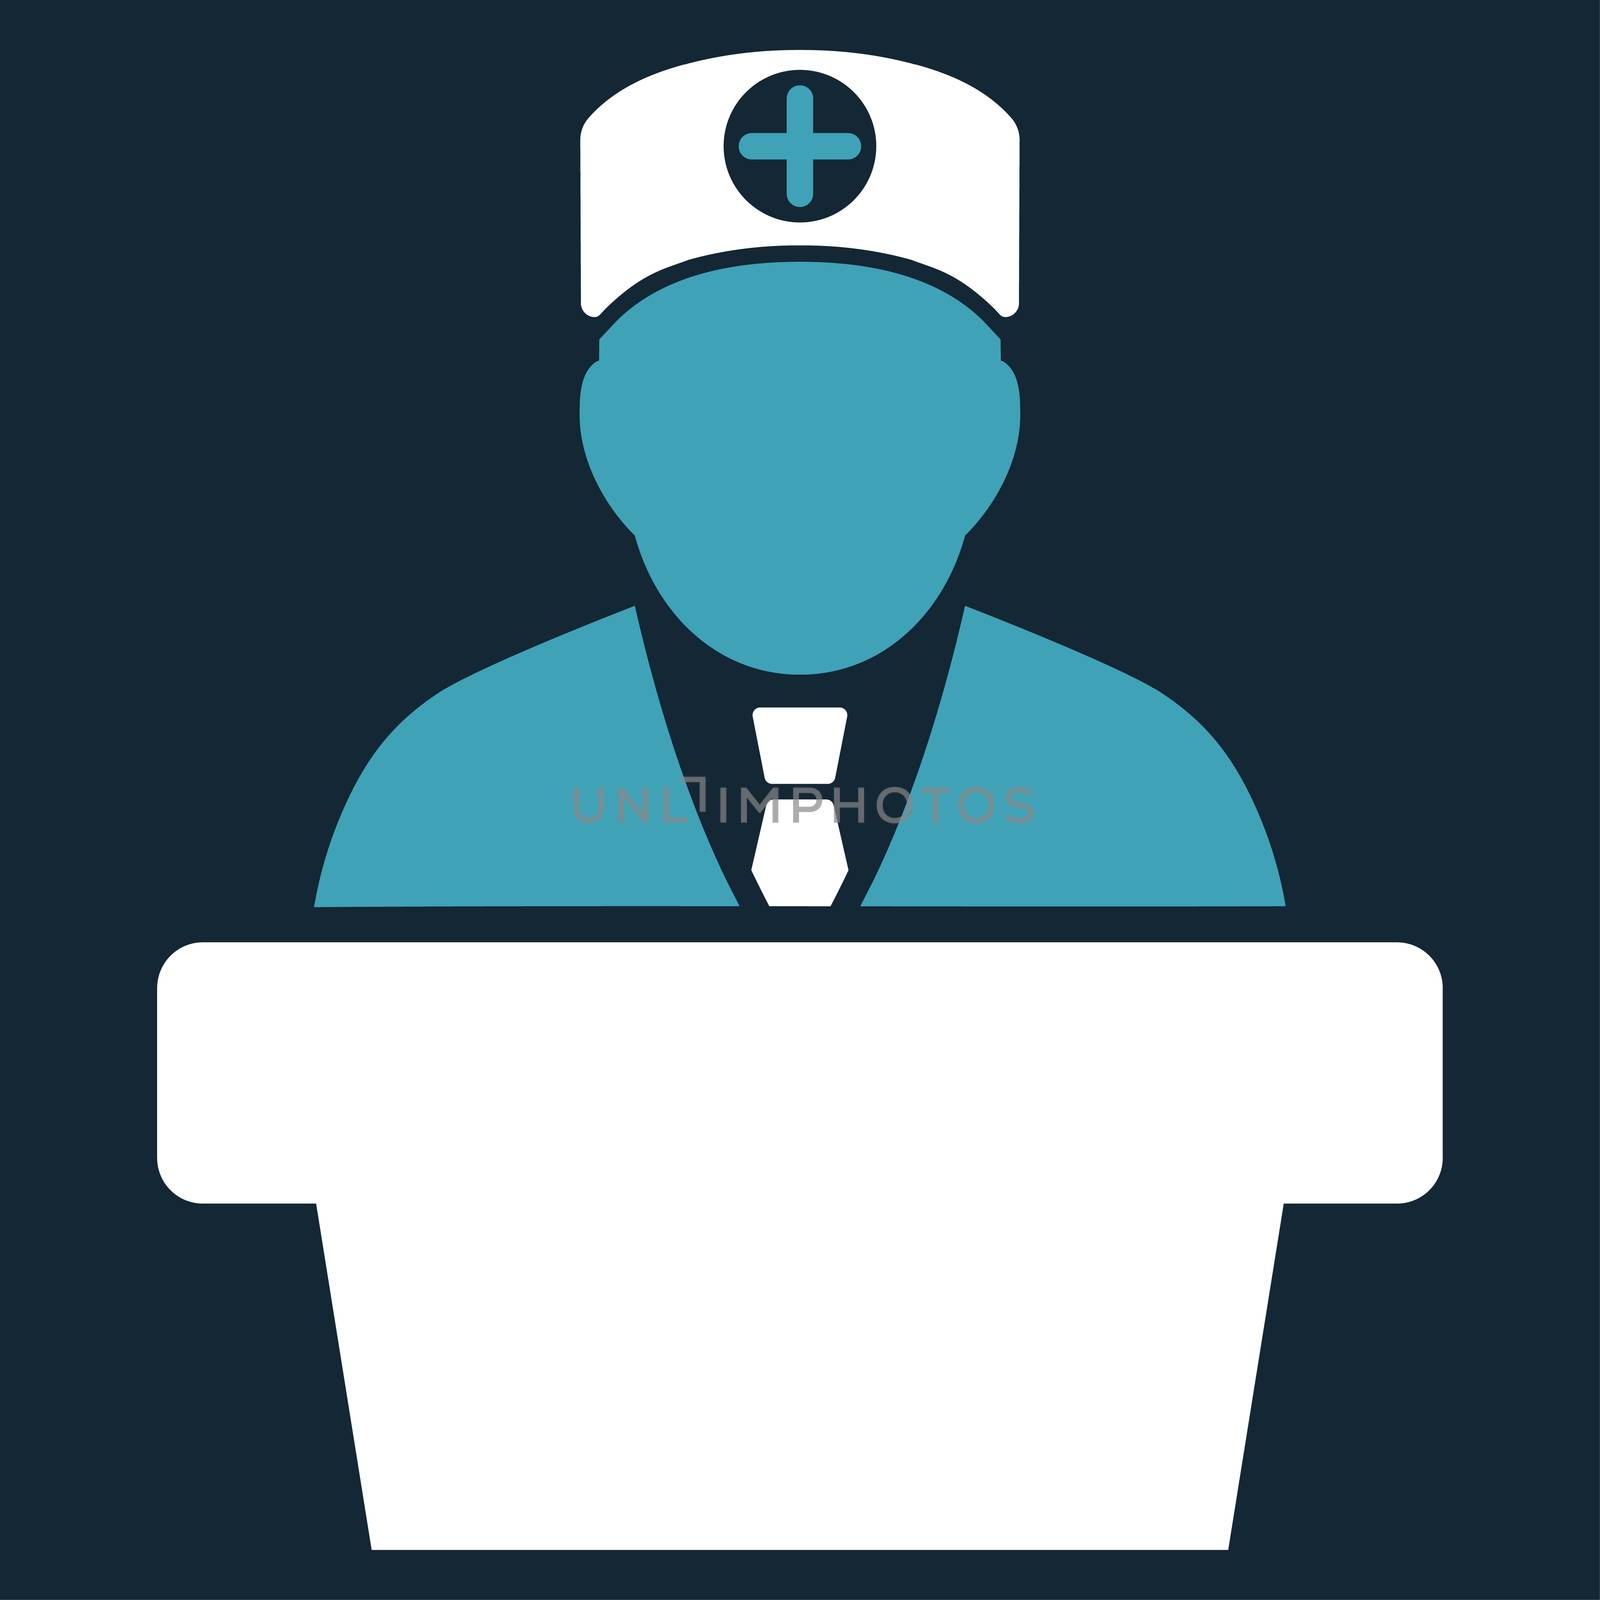 Medical Official Lecture raster icon. Style is bicolor flat symbol, blue and white colors, rounded angles, dark blue background.